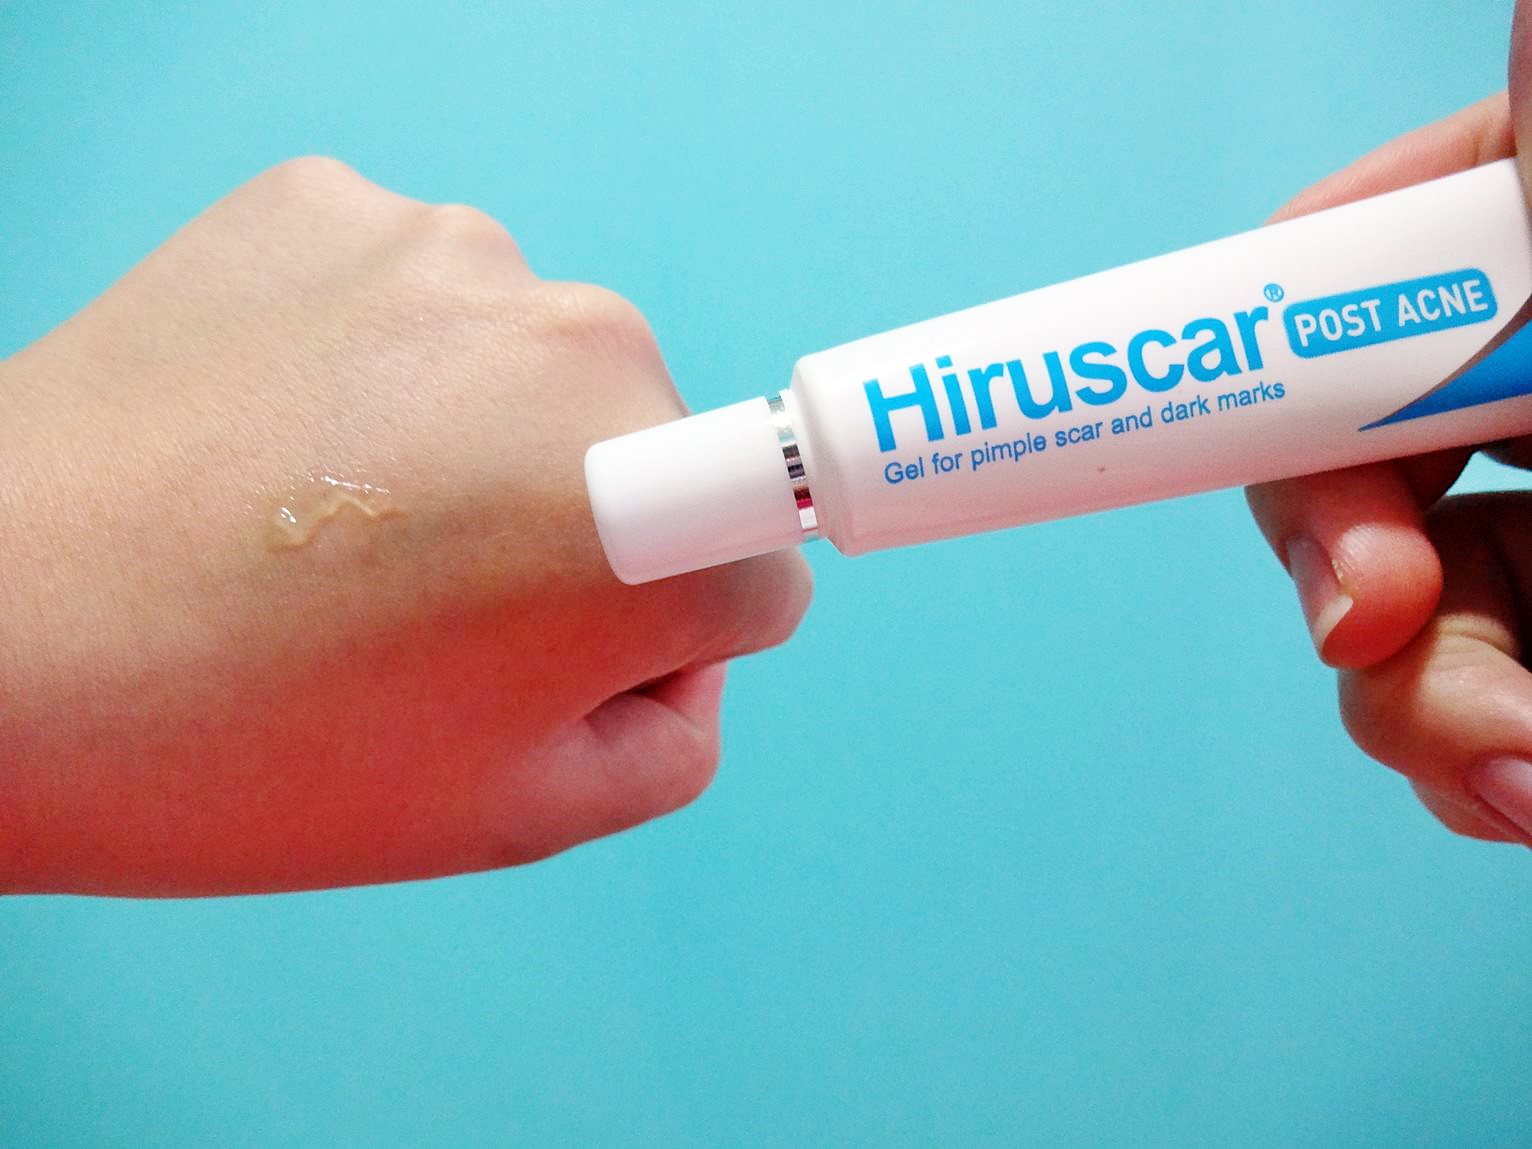 mshuiling : Review: Hiruscar Post Acne